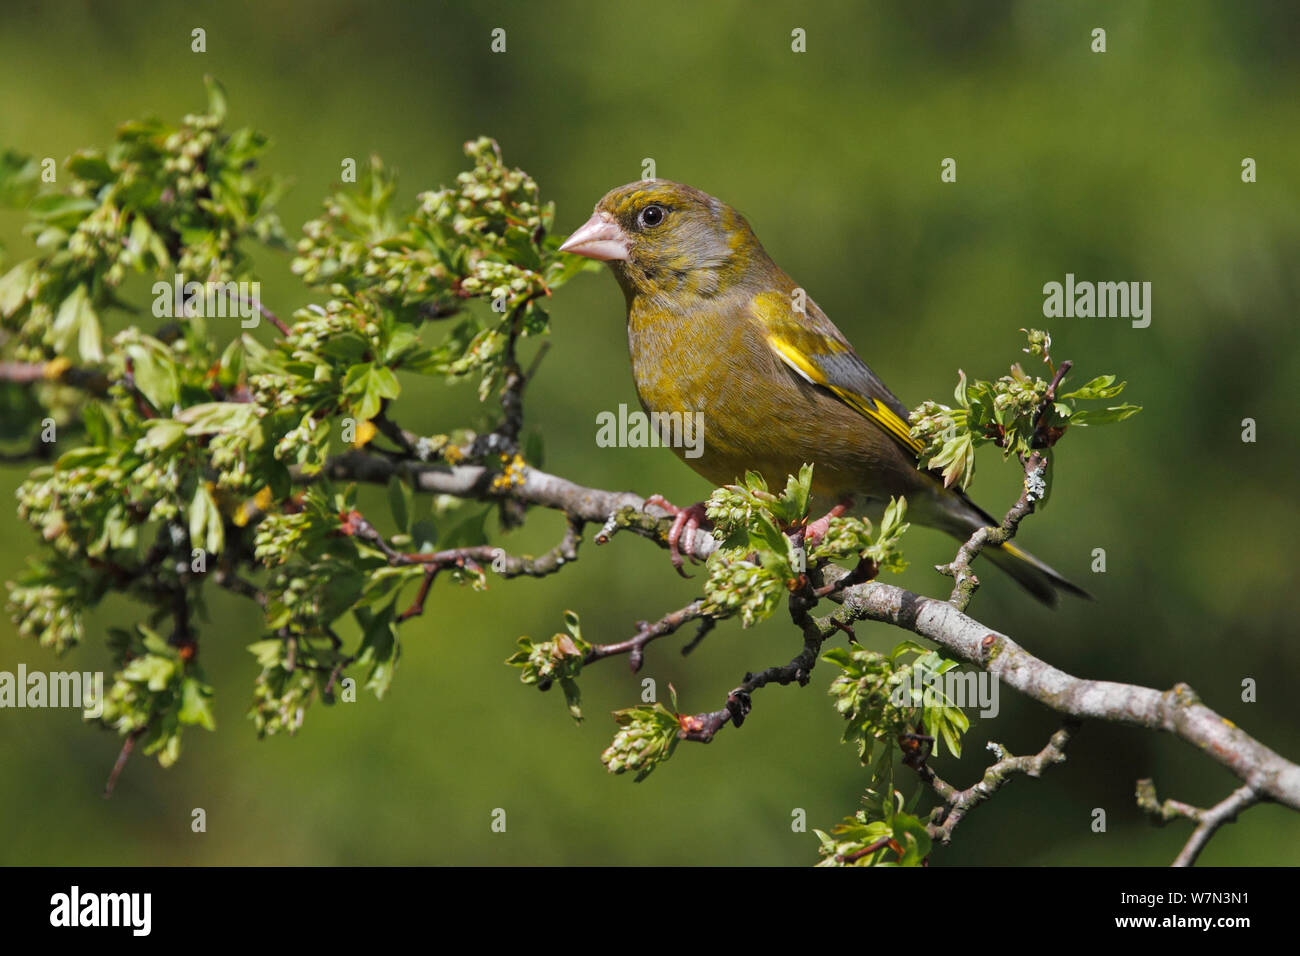 Male Greenfinch (Carduelis chloris) perched on Hawthorn branch, Cheshire, UK, April Stock Photo